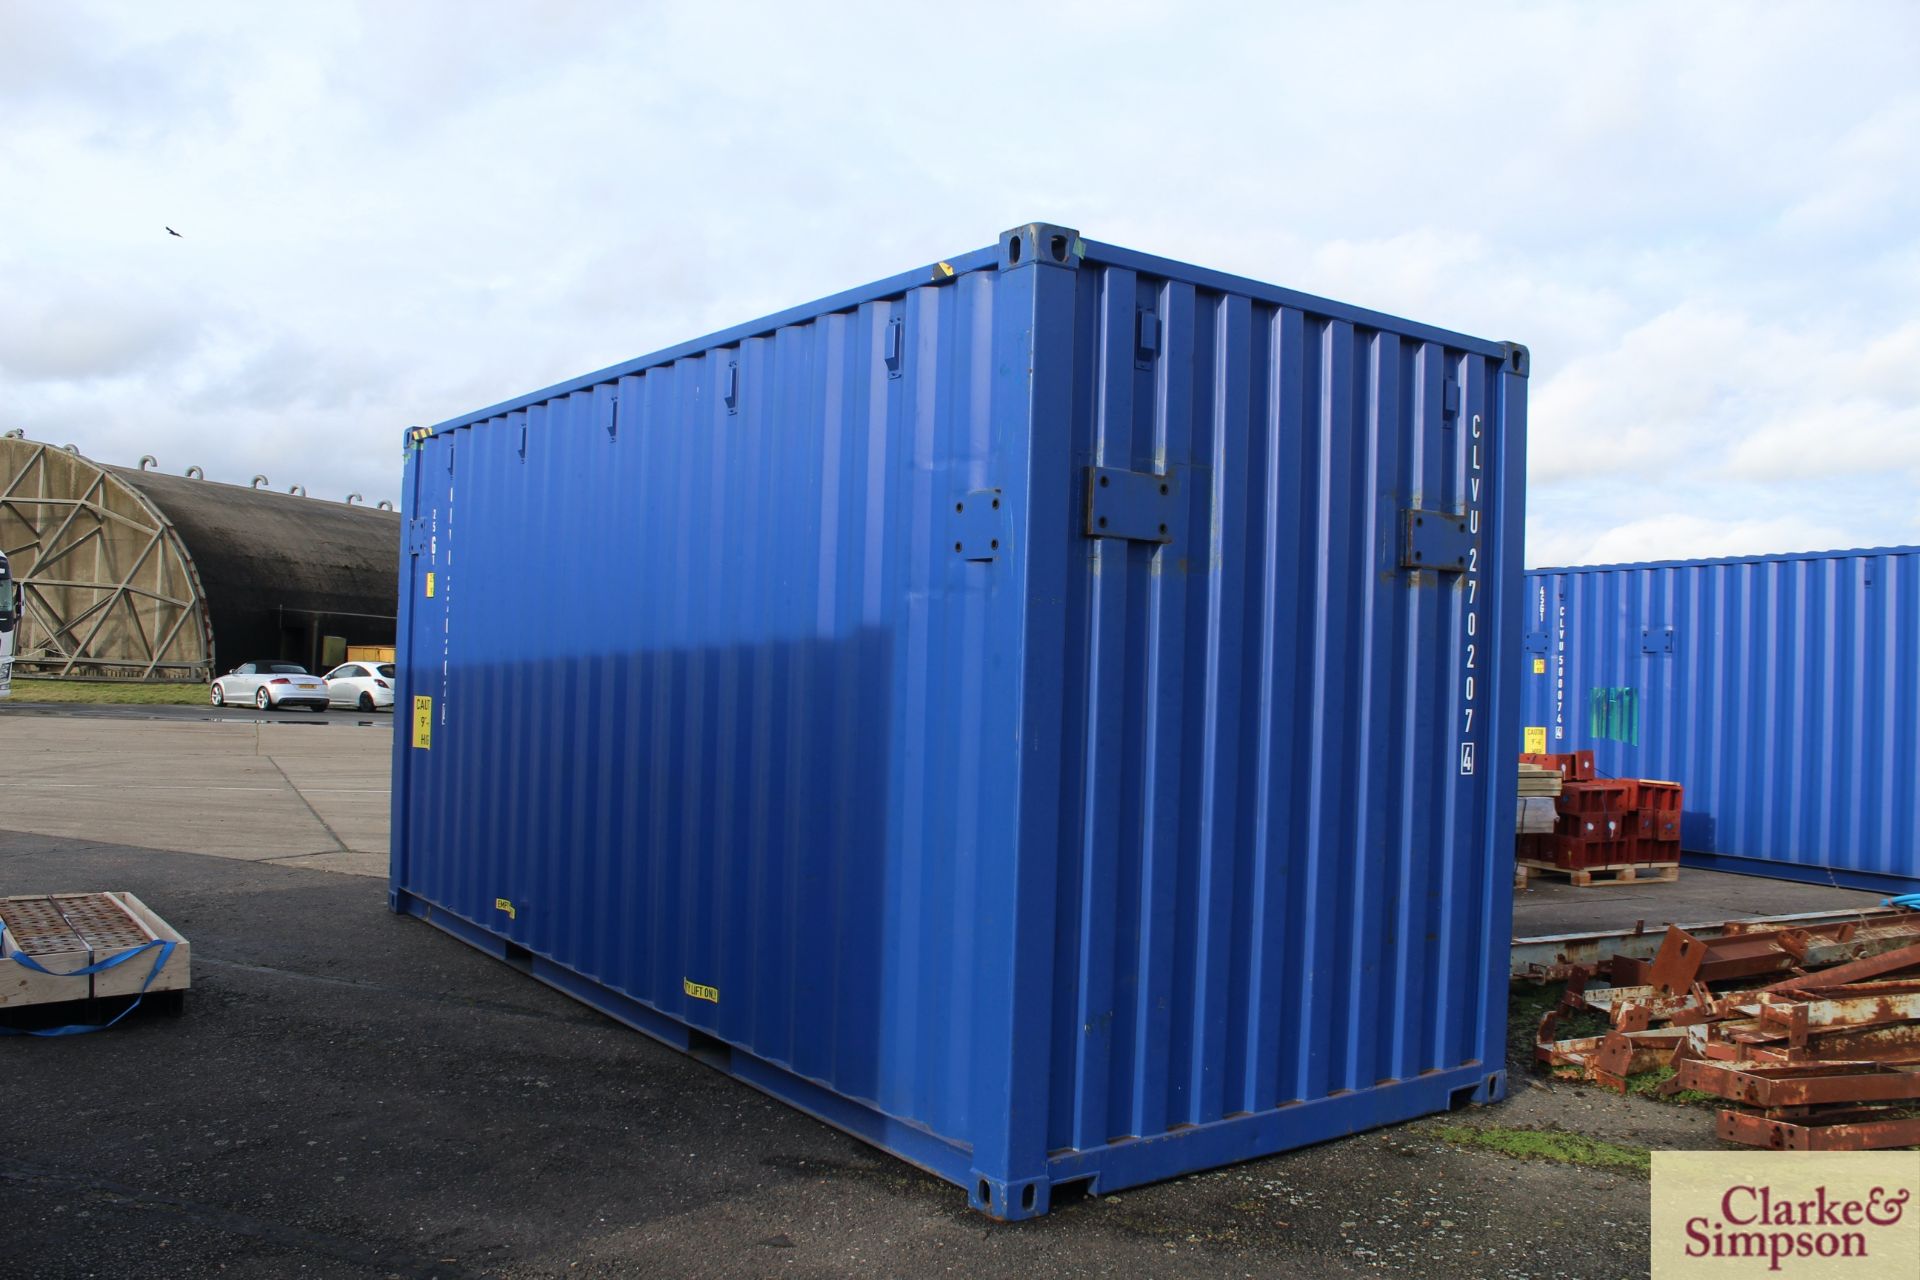 20ft x 9ft6in high shipping container. 2019. Partially reinforced to interior to include plates - Image 6 of 19